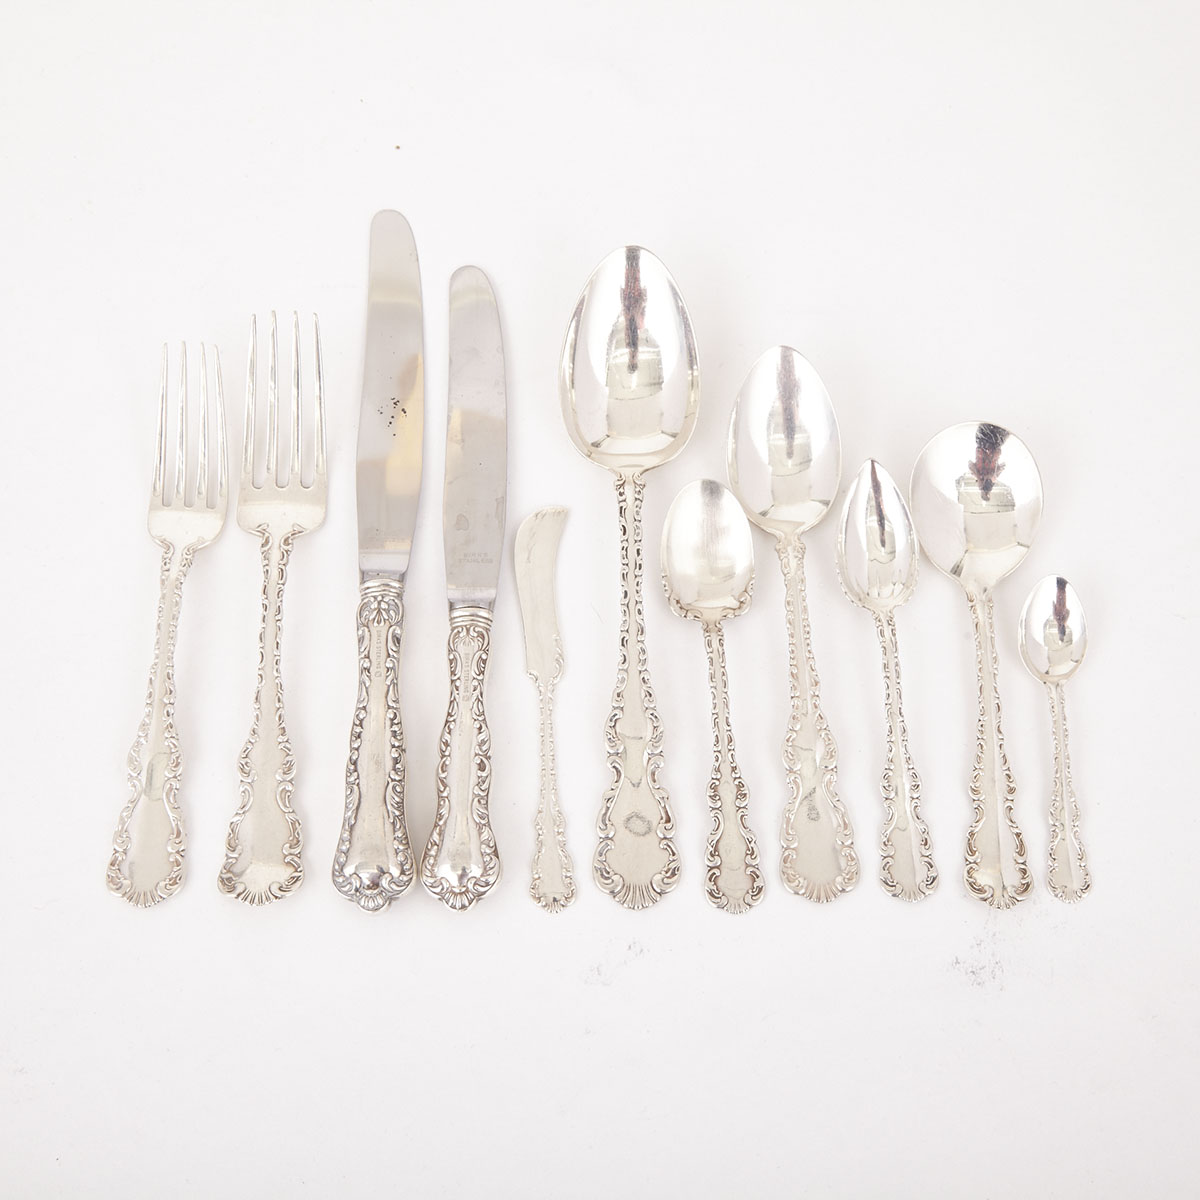 Canadian Silver ‘Louis XV’ Pattern Flatware, Henry Birks & Sons, Montreal, Que. and J.E. Ellis & Co., Toronto, Ont., early 20th century